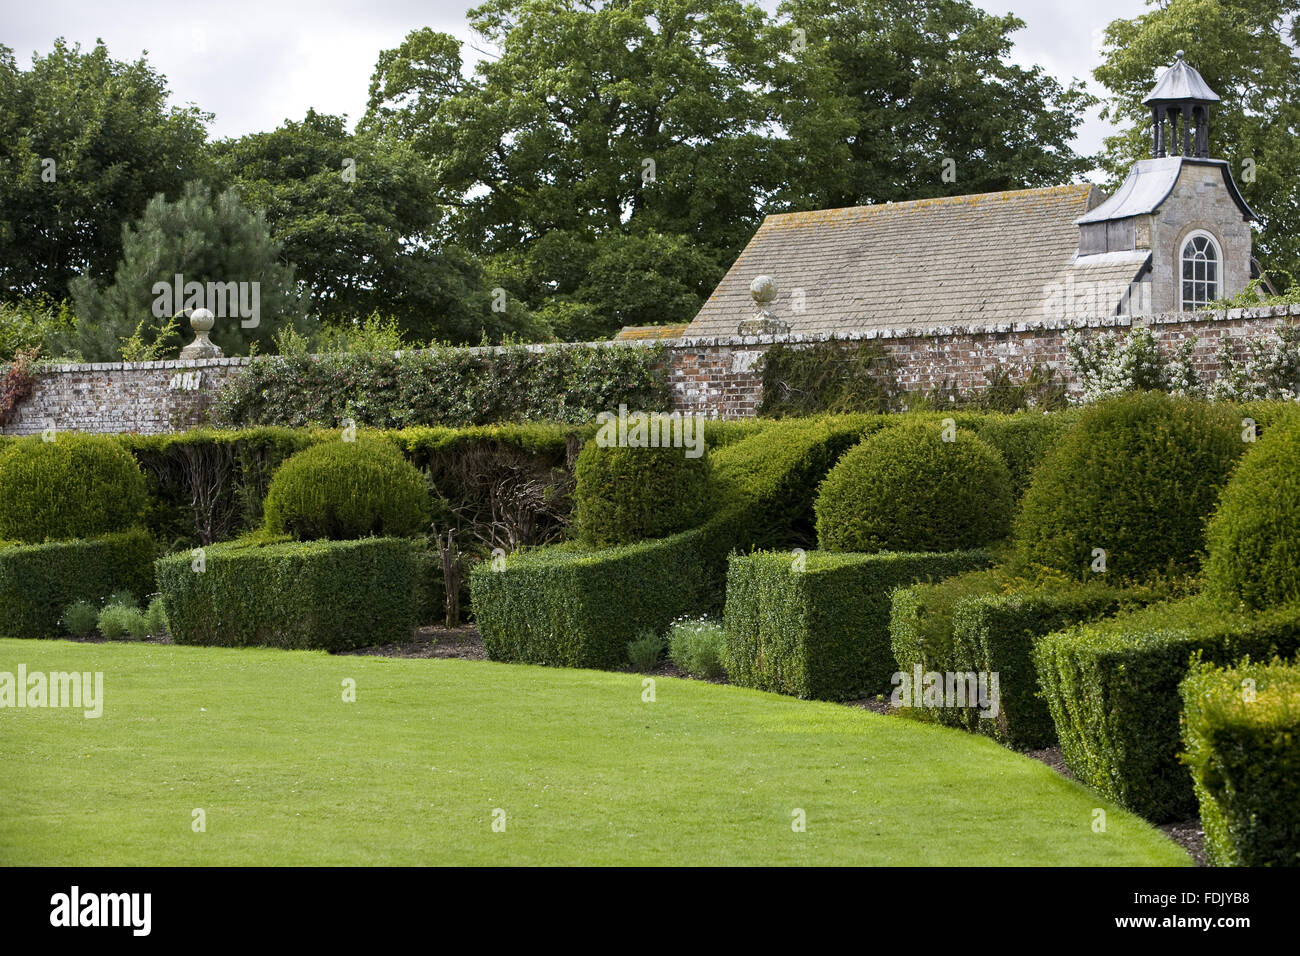 The semi-circular lawn and topiary hedging in the garden at Avebury Manor, Wiltshire. Stock Photo